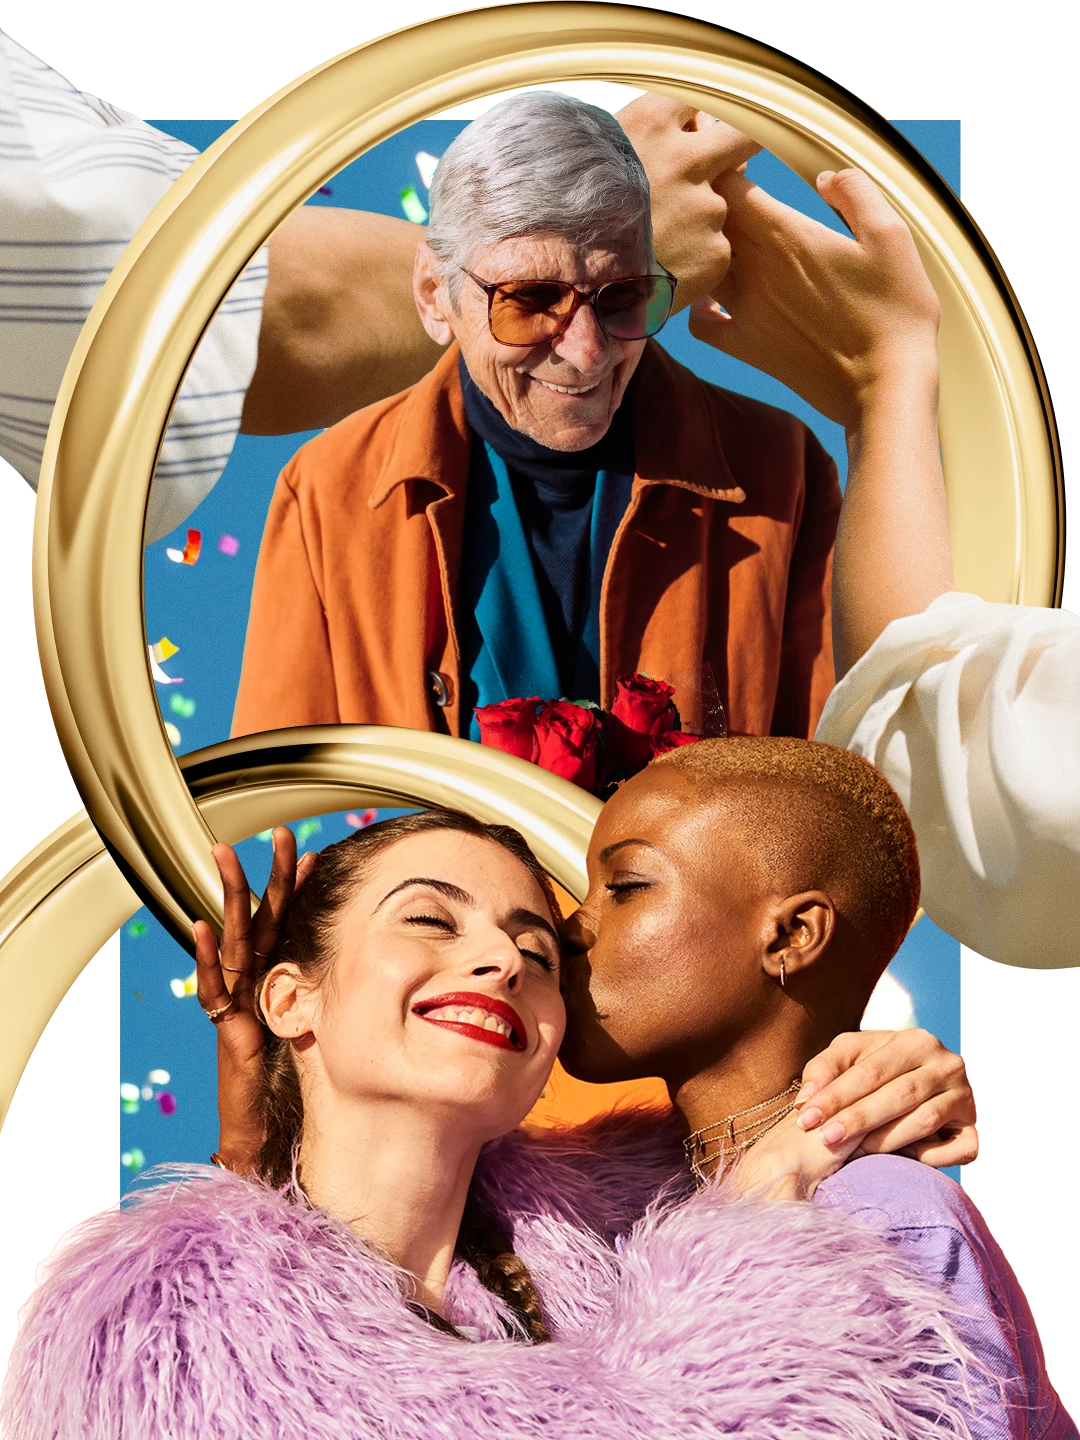 Collage of relationship themes. Two entangled wedding bands in the center. Older white man holds a bouquet of roses. Interracial queer couple kissing on the cheek. White hands joined in the background.
